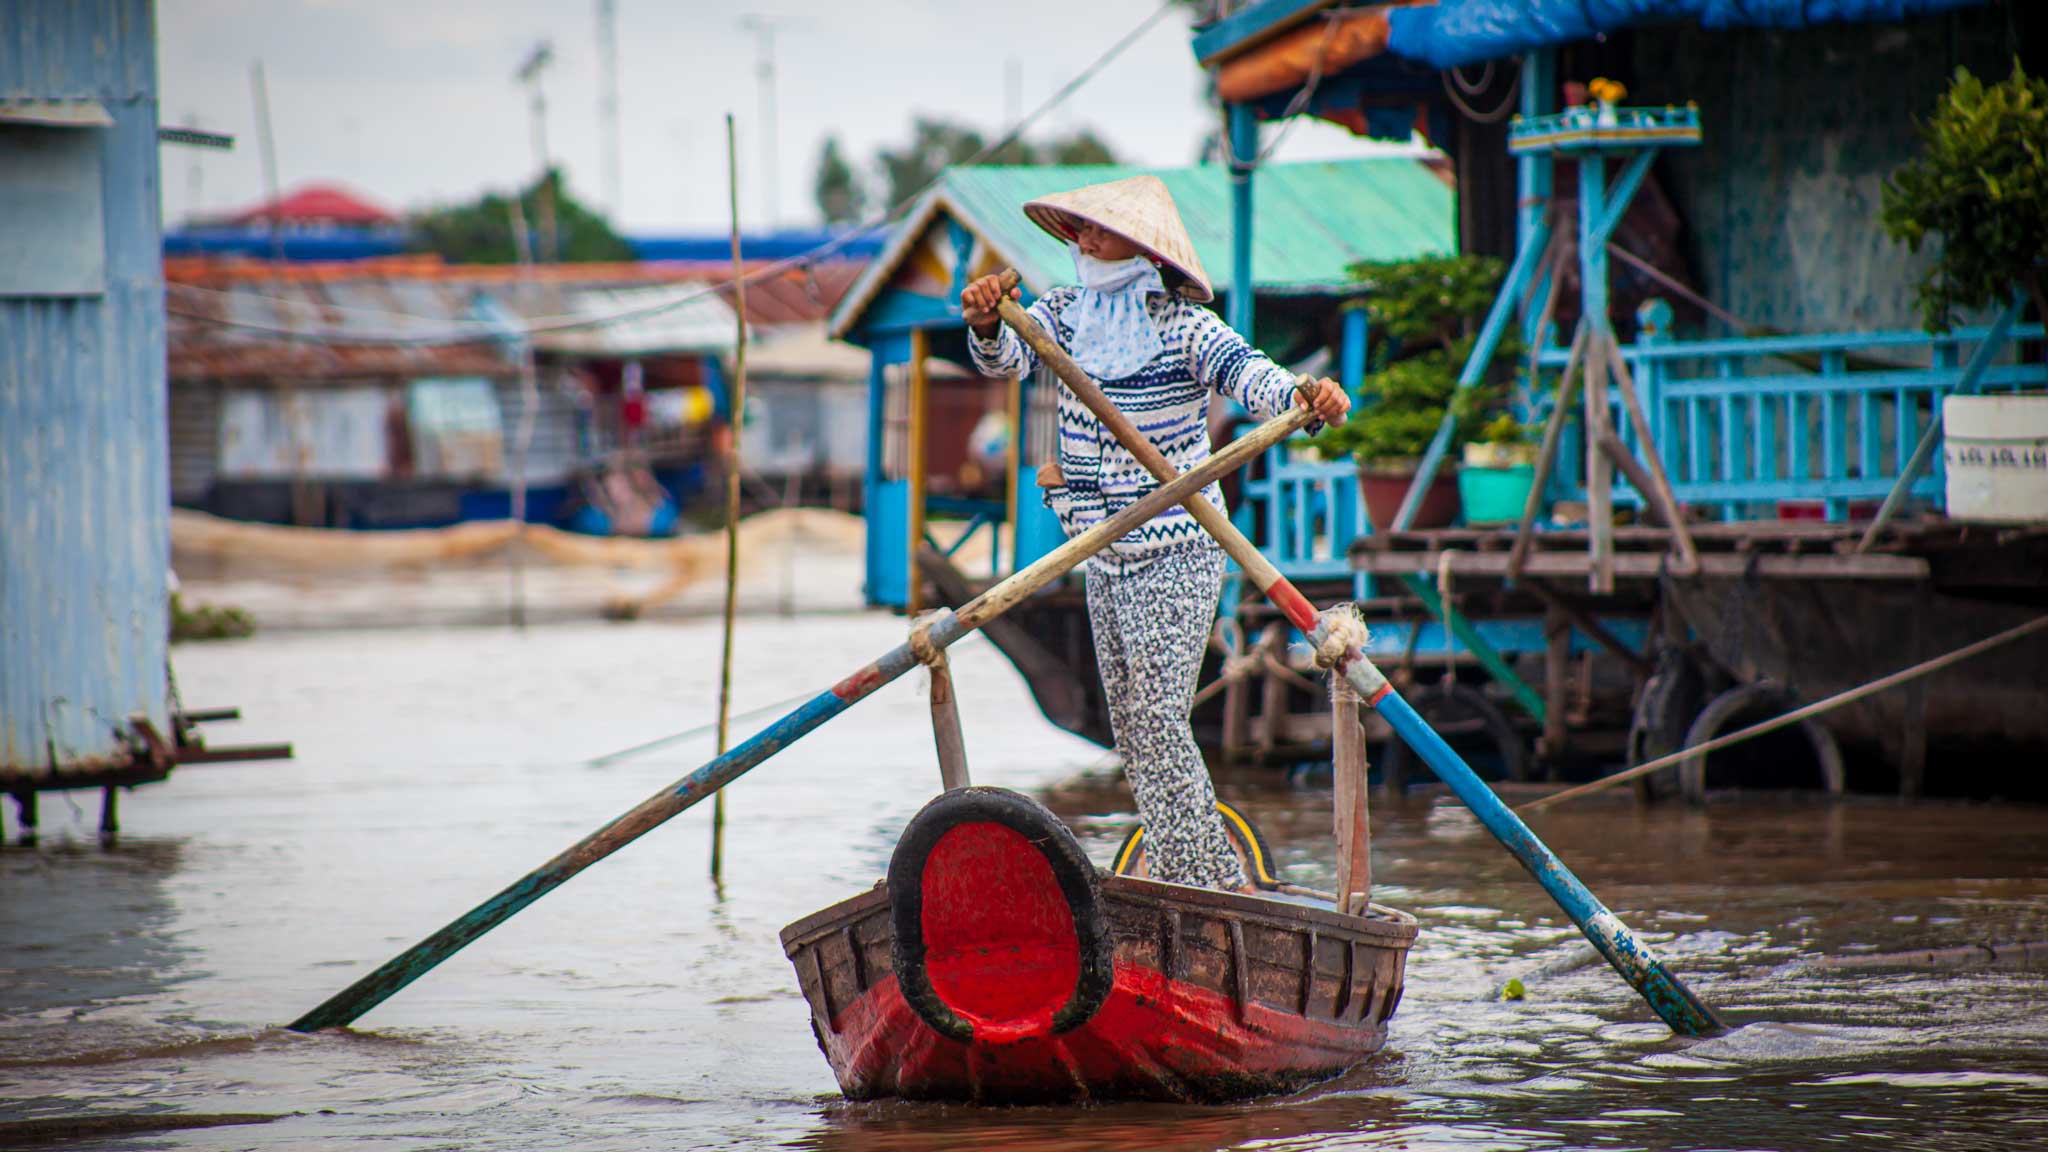 Heading to the market from the floating villages